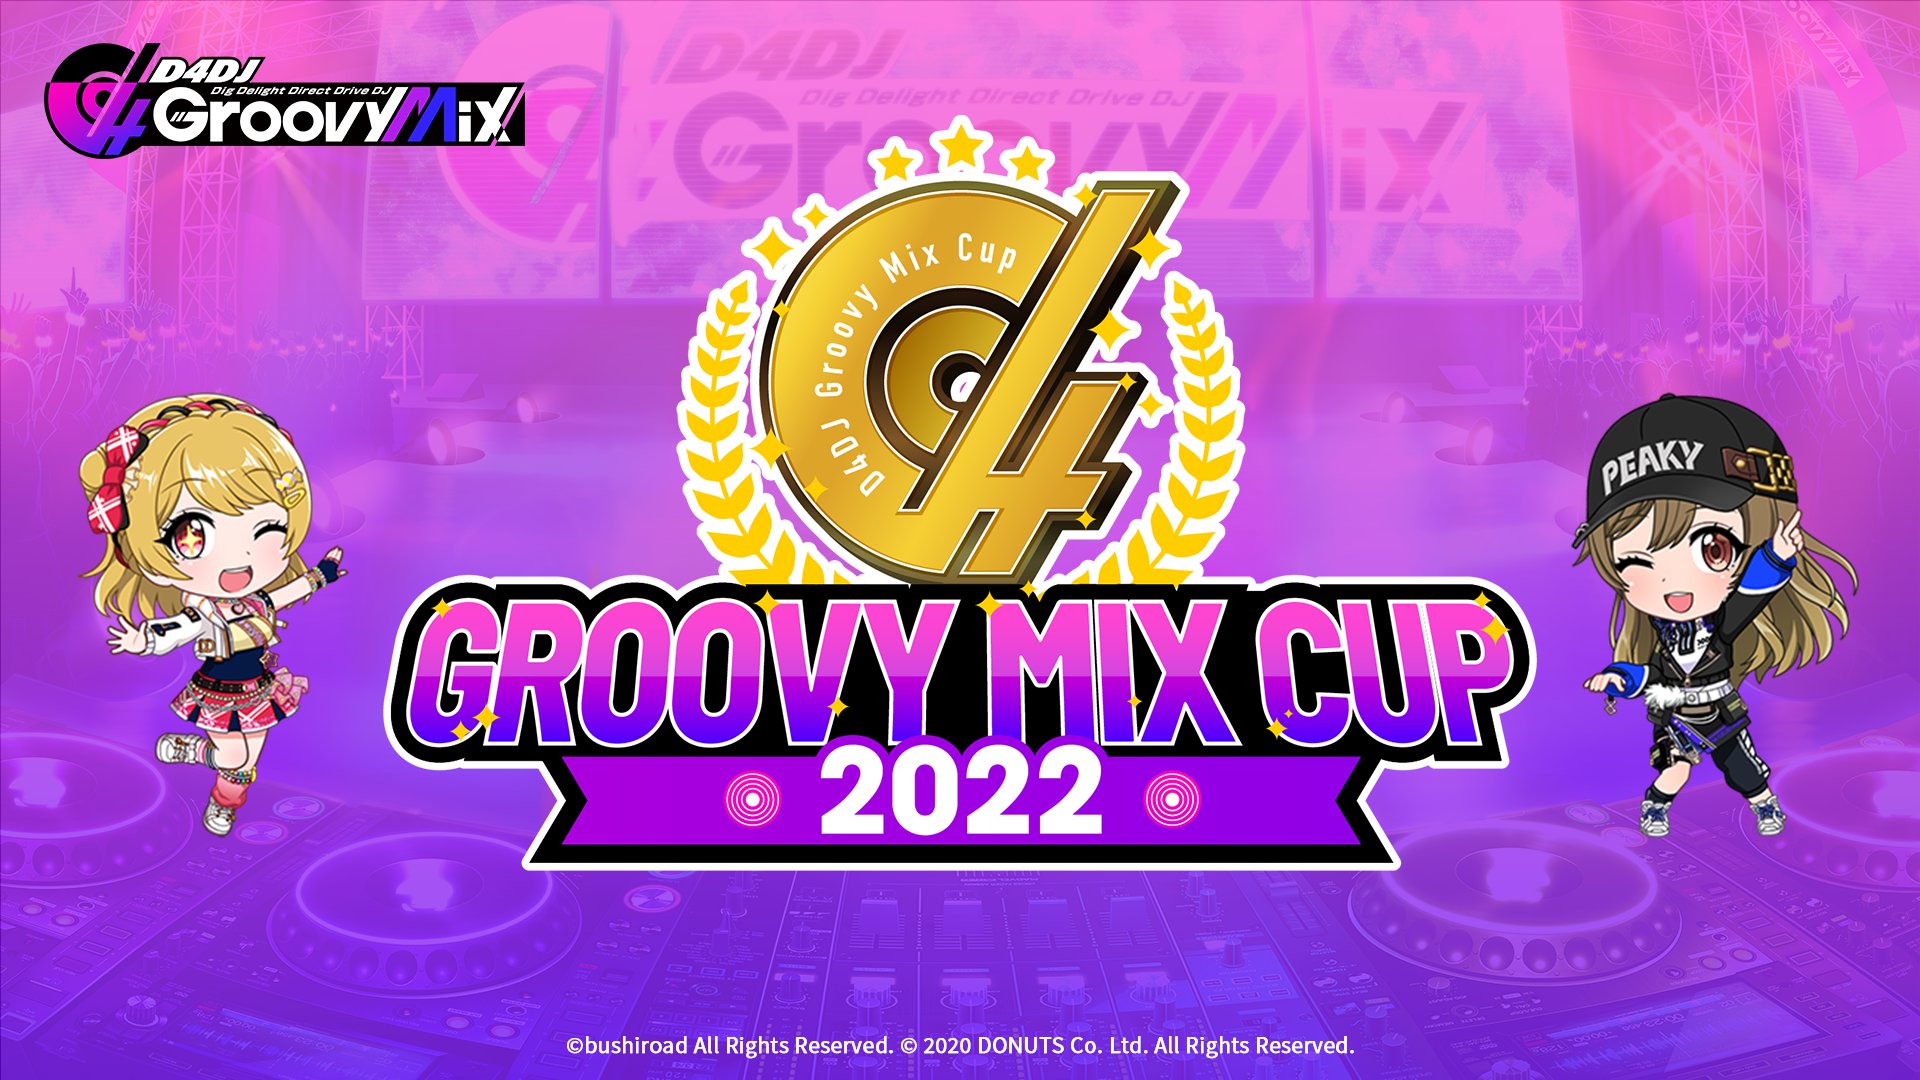 Inhalere brugervejledning spektrum D4DJ Groovy Mix EN on Twitter: "🏆We are holding the first official in-game  tournament, Groovy Mix Cup! Players will compete with Technical Score, a  system that only measures accuracy of rhythm gameplay!